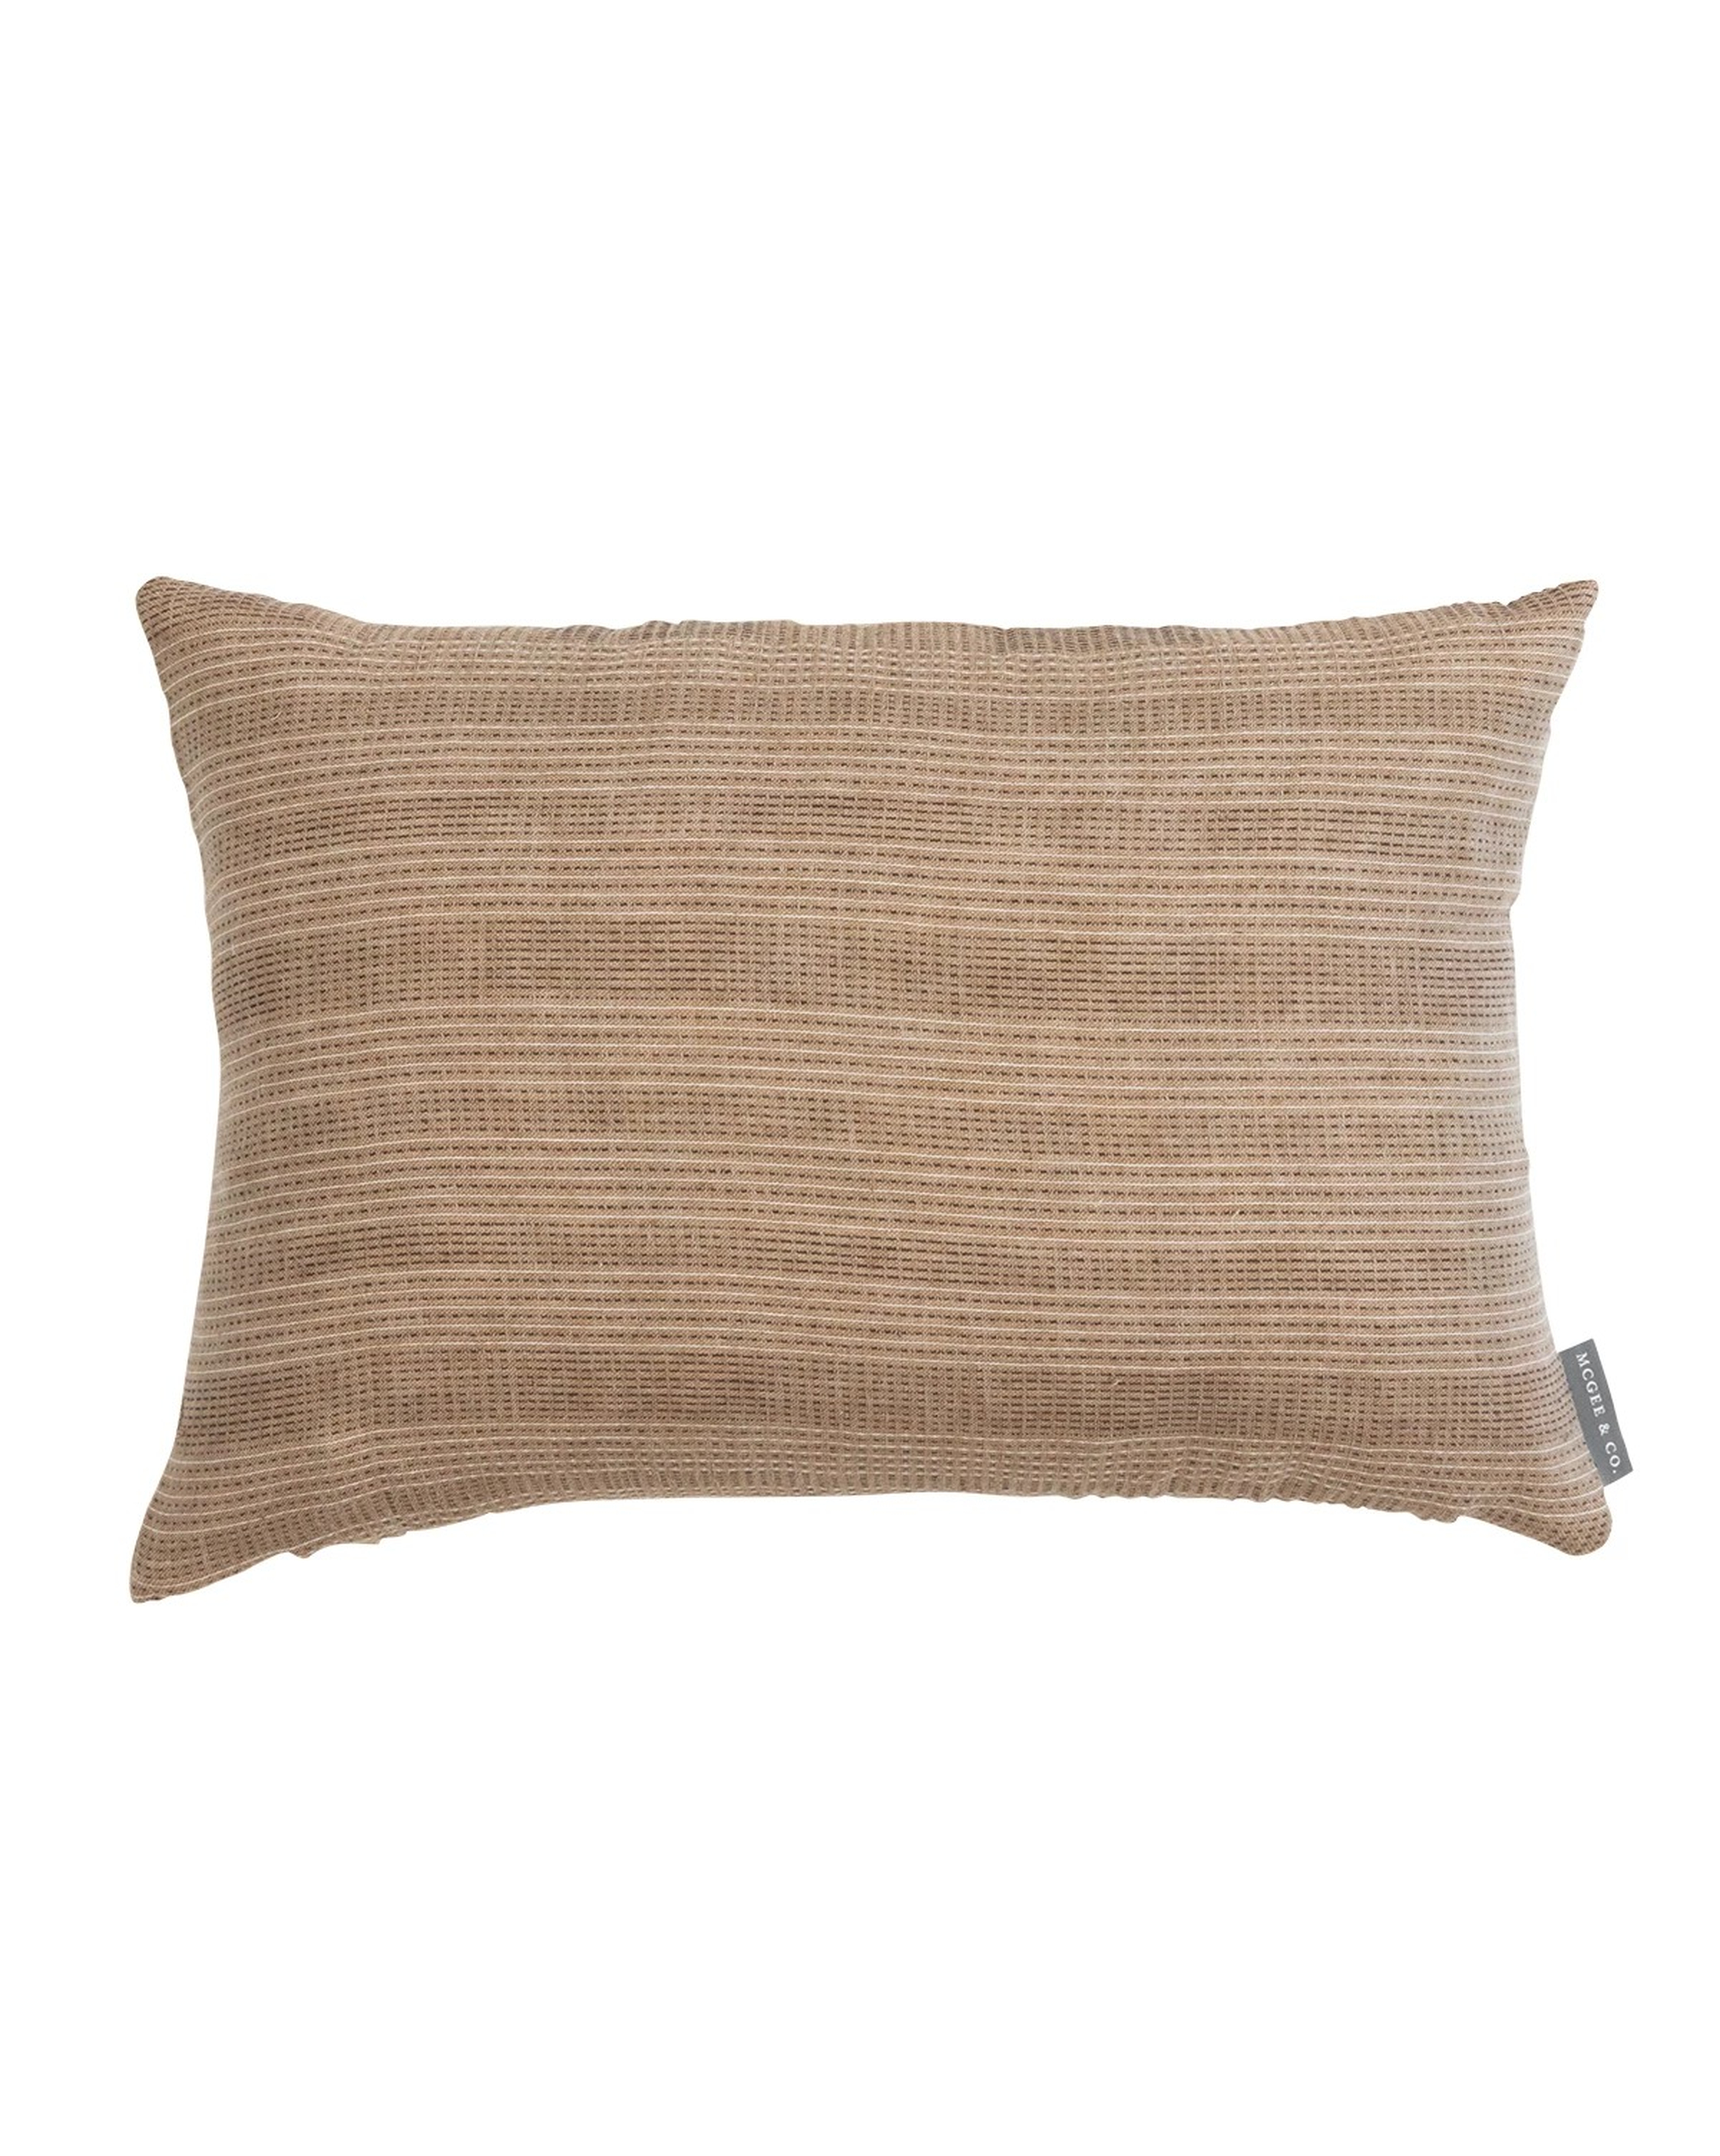 CASSIA VINTAGE NO. 2 PILLOW WITHOUT INSERT - 14" x 20" - McGee & Co.